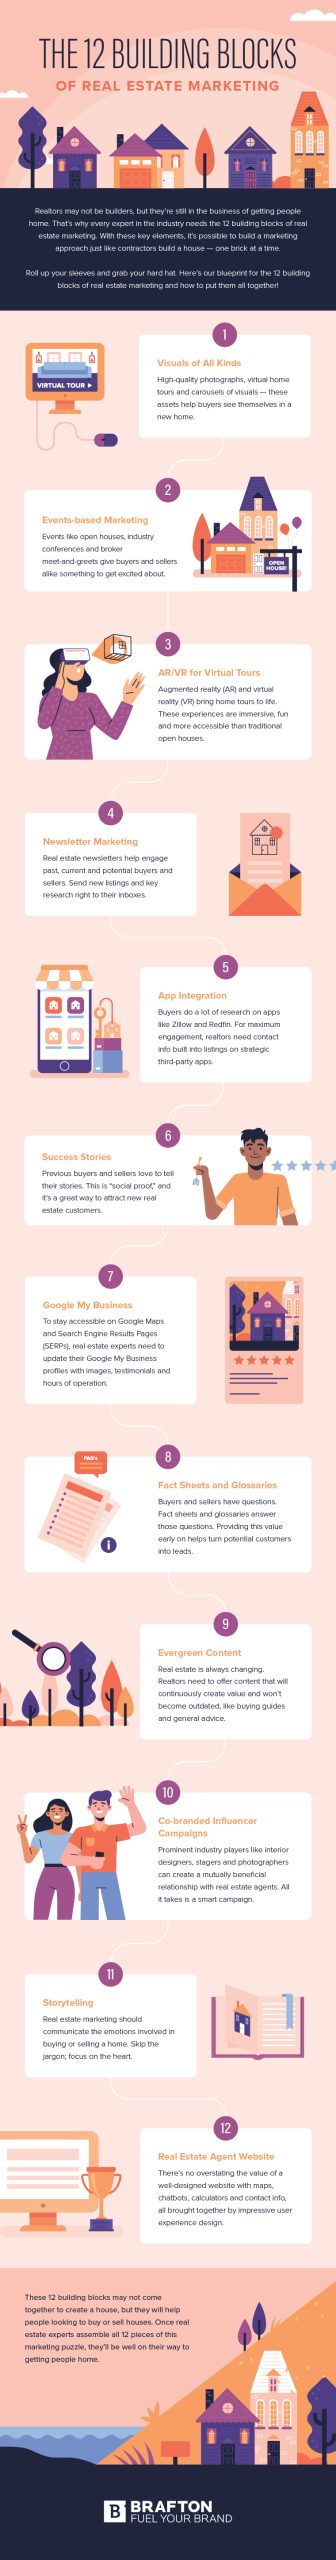 12 building blocks of real estate marketing infographic